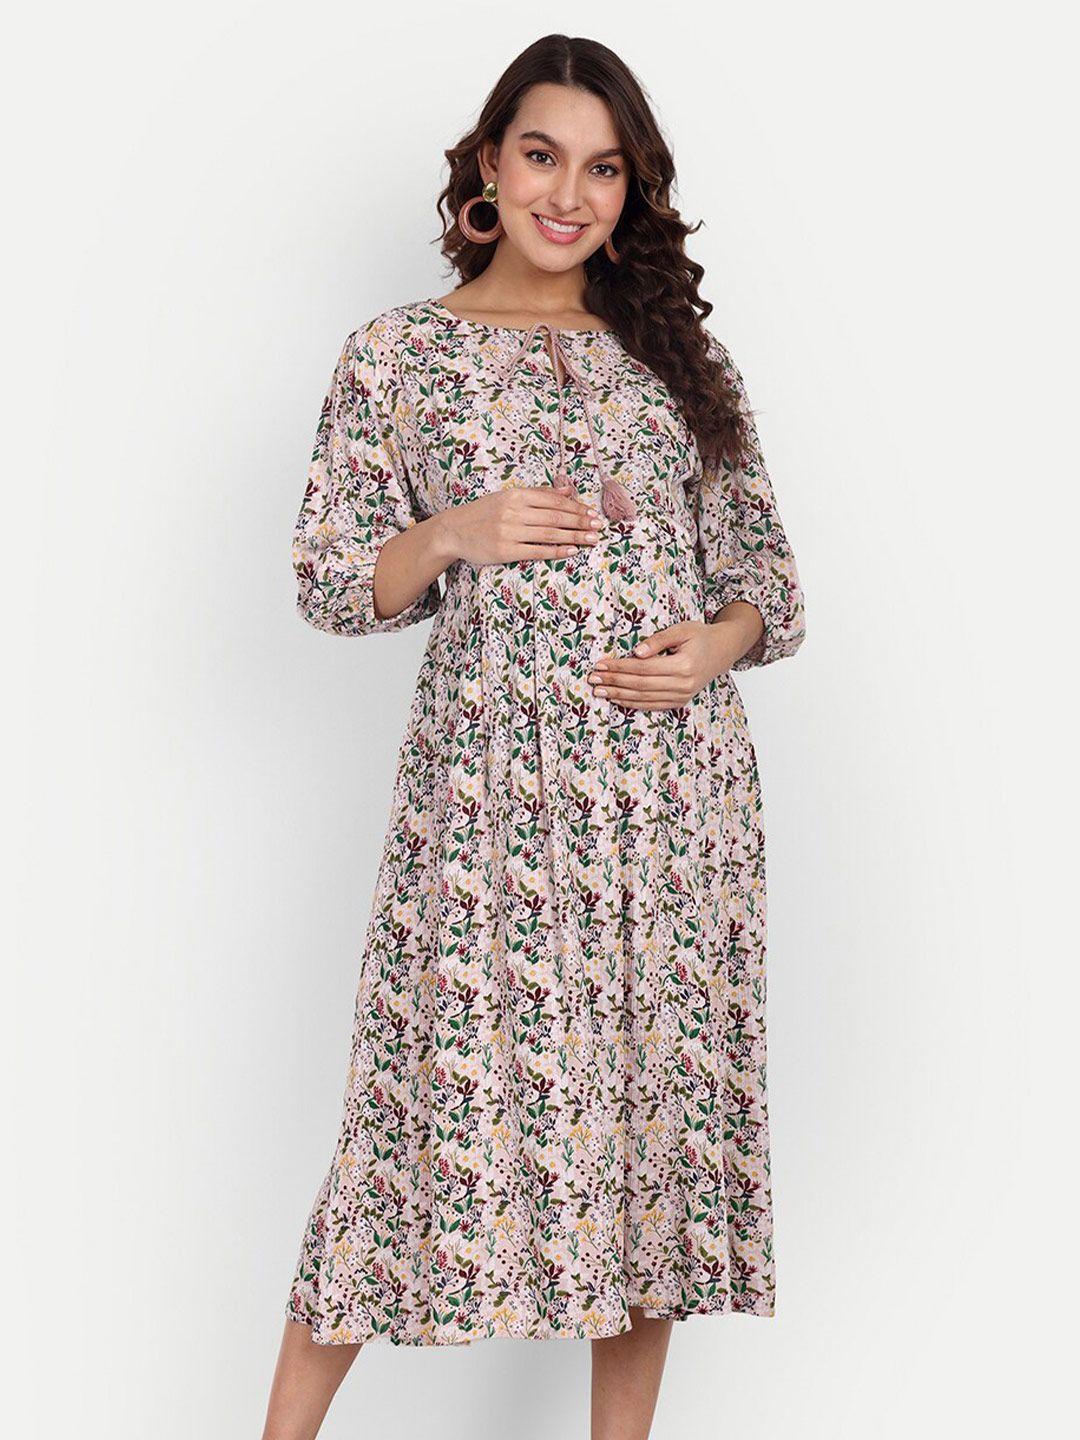 aaruvi ruchi verma tie-up neck floral printed midi fit and flare maternity dress